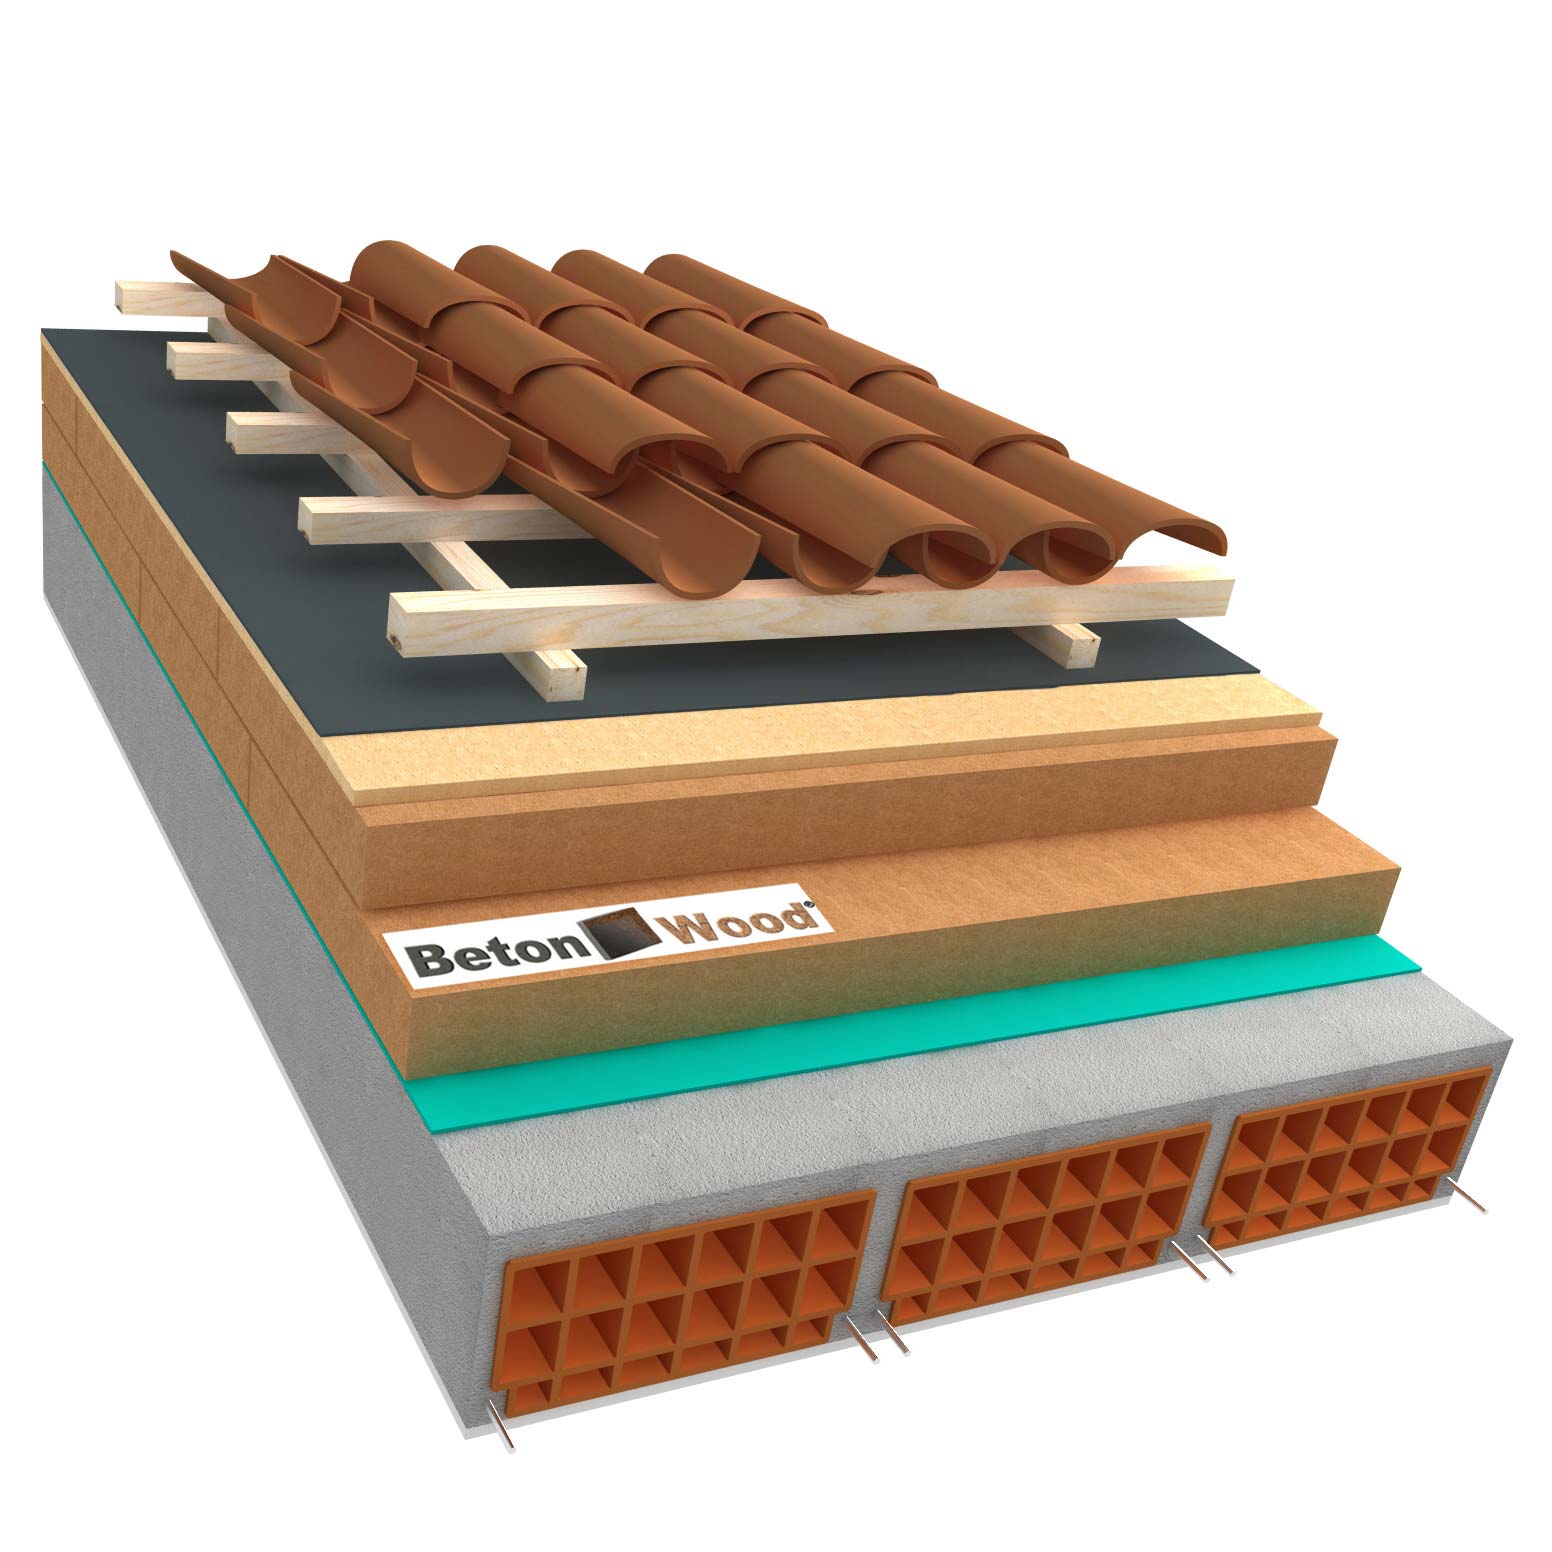 Ventilated roof with wood fiber Isorel and Therm SD on concrete